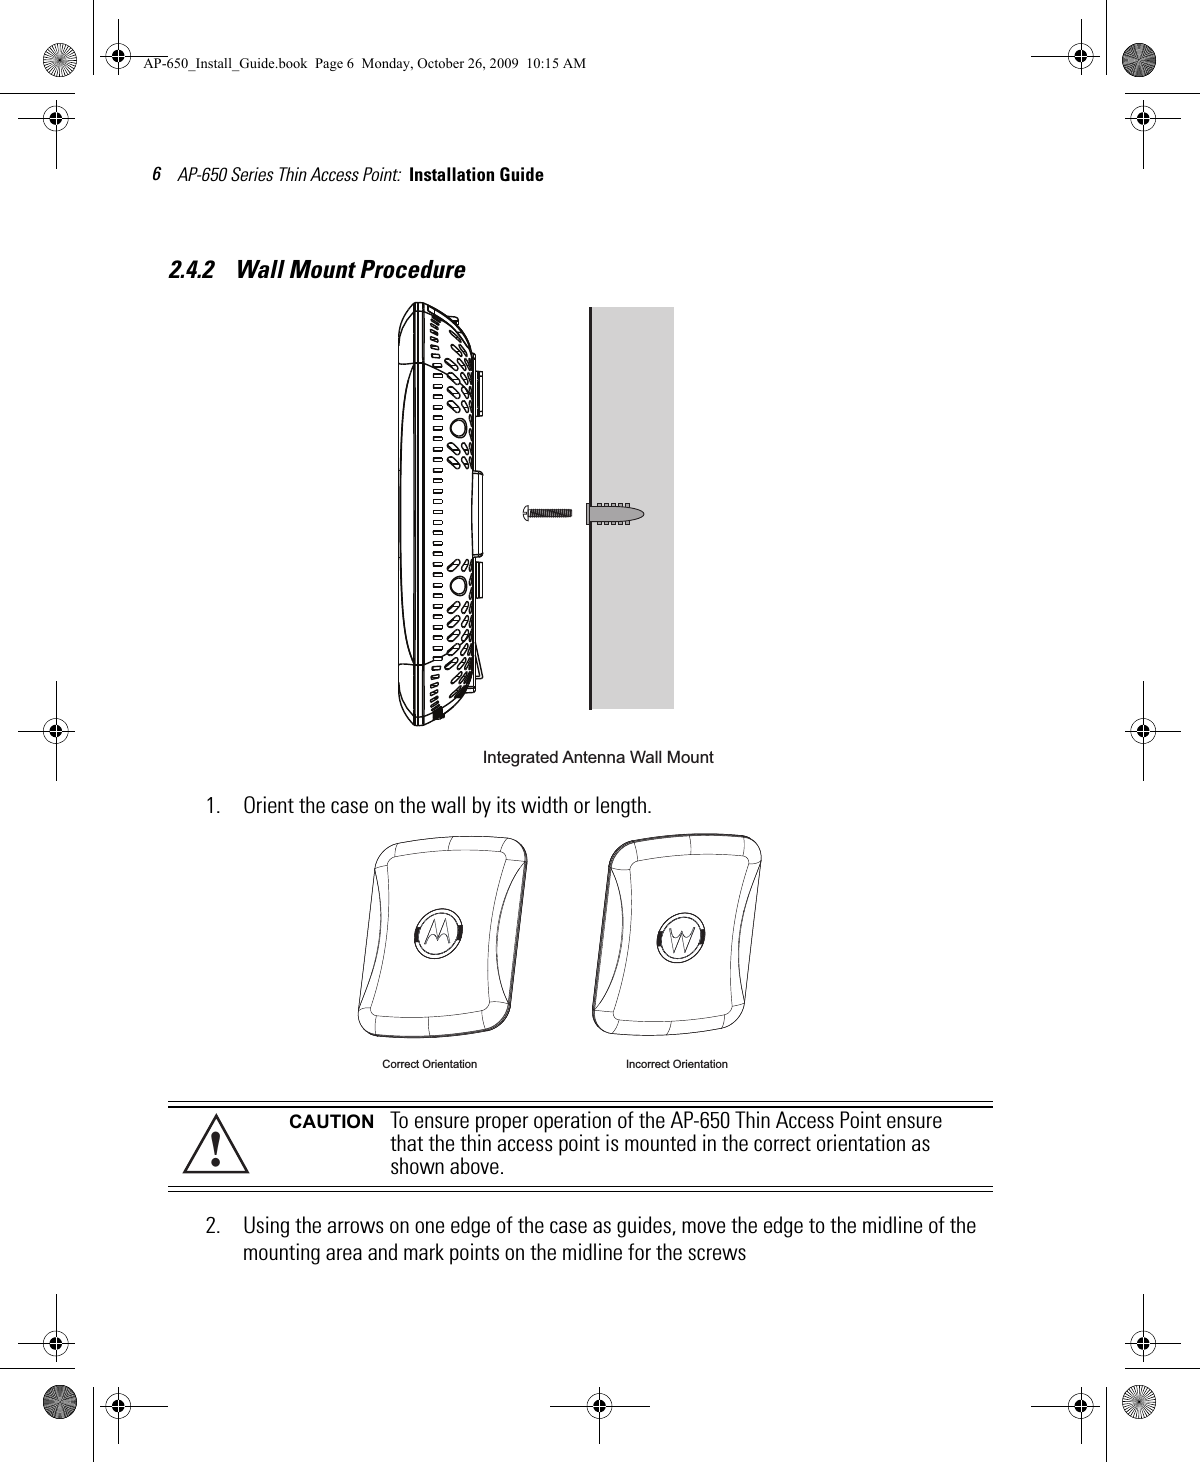 AP-650 Series Thin Access Point:  Installation Guide 62.4.2    Wall Mount Procedure1. Orient the case on the wall by its width or length.2. Using the arrows on one edge of the case as guides, move the edge to the midline of the mounting area and mark points on the midline for the screwsCAUTION To ensure proper operation of the AP-650 Thin Access Point ensure that the thin access point is mounted in the correct orientation as shown above.Integrated Antenna Wall Mount Correct Orientation Incorrect Orientation!AP-650_Install_Guide.book  Page 6  Monday, October 26, 2009  10:15 AM